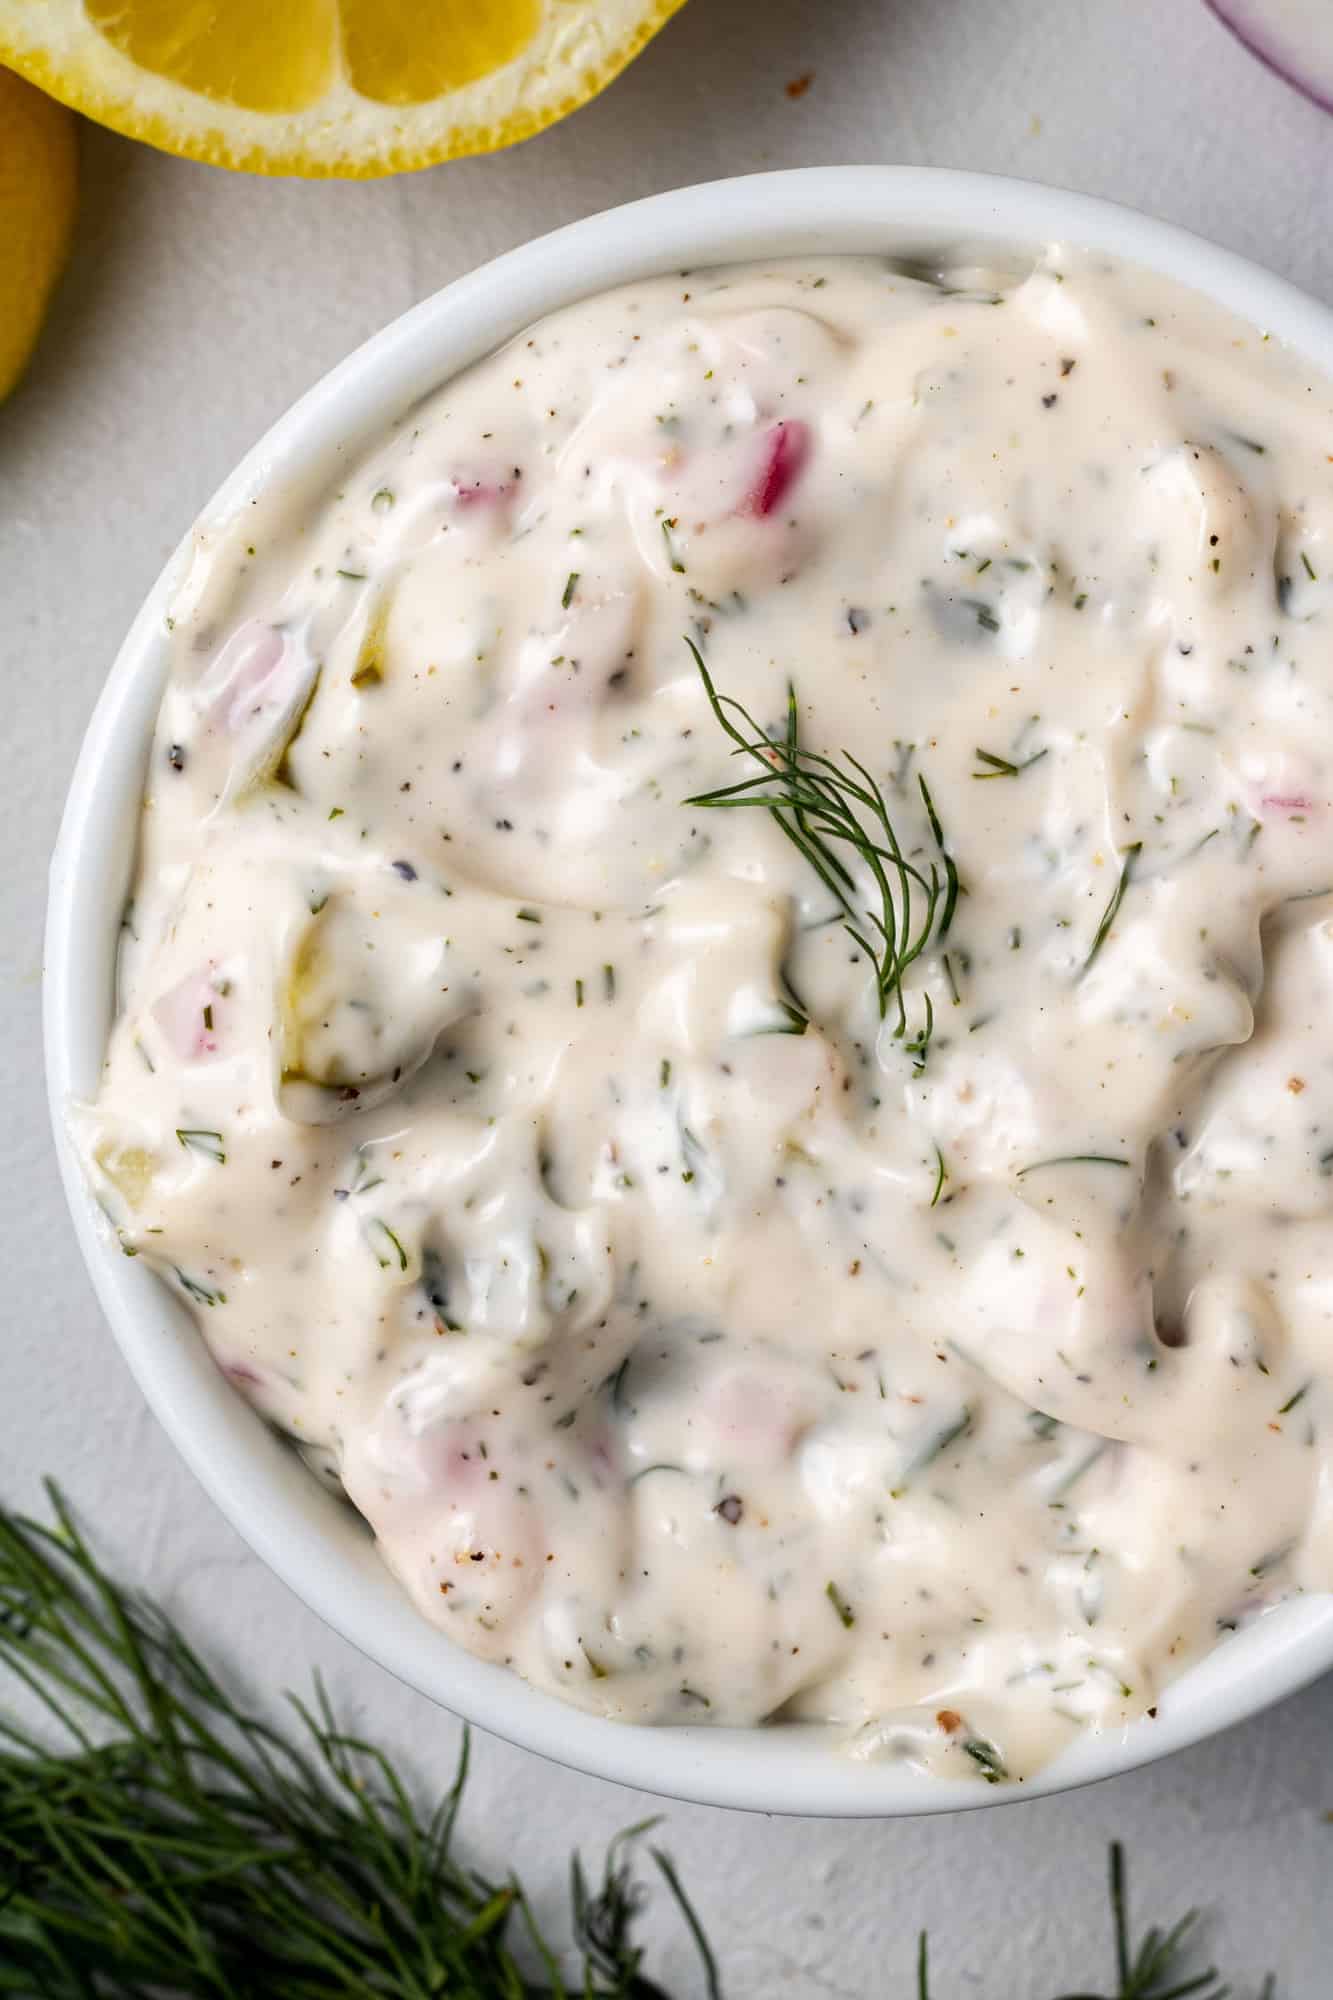 Overhead view of homemade tartar sauce in a round white bowl garnished with fresh dill.